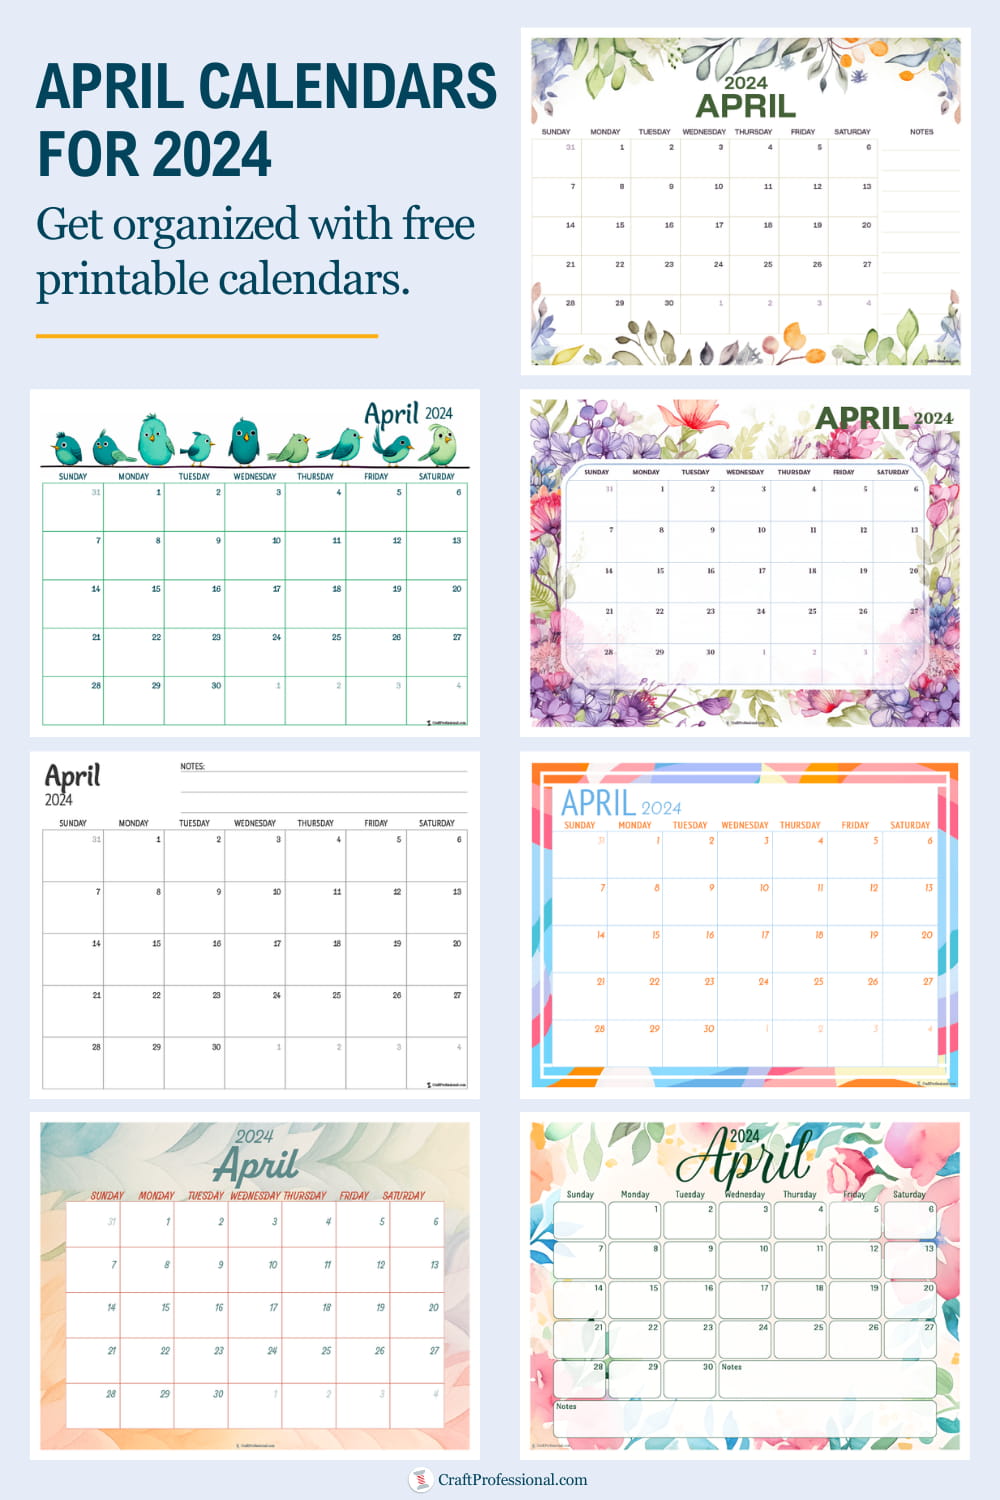 Collage of printable calendars. Text - April calendars for 2024. Get organized with free printable calendars.